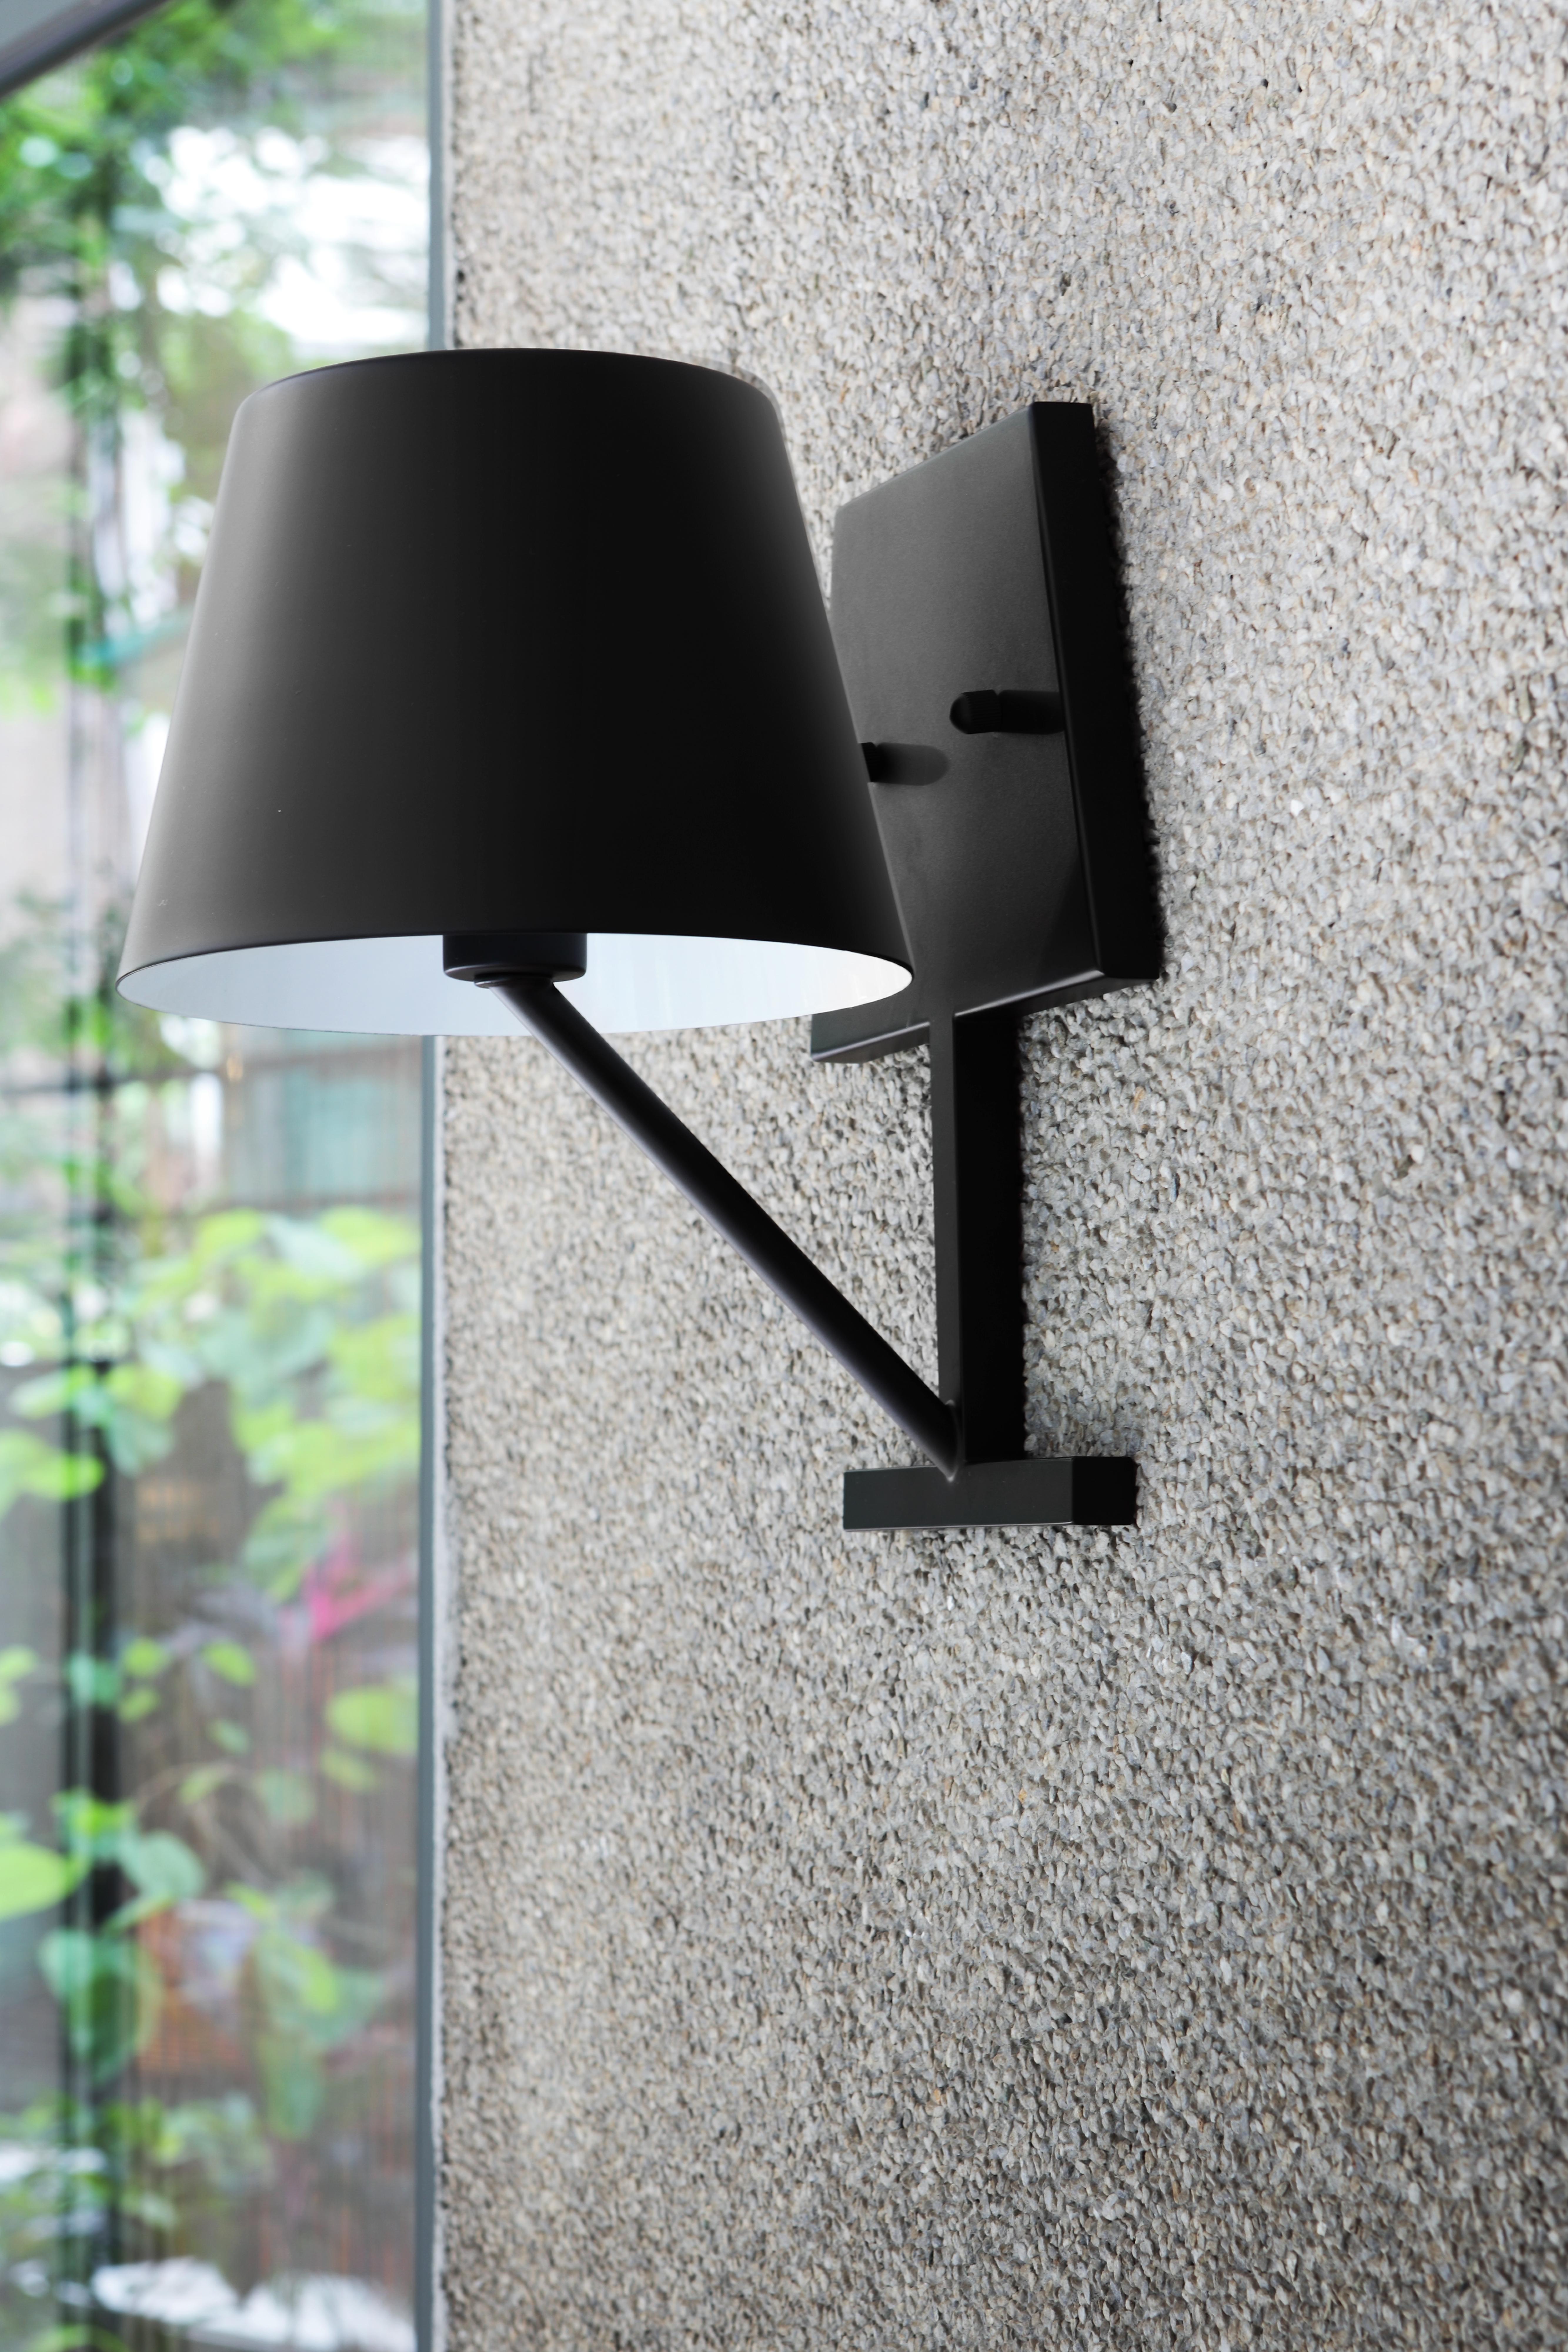 Cast a shadow on yourself. CONCOM Wall Sconce creates a fascinating visual illusion in space, taking something 2D and morphing it into some 3D. Allow CONCOM Wall Sconce to be your backdrop, gently lighting up your surroundings in which people come